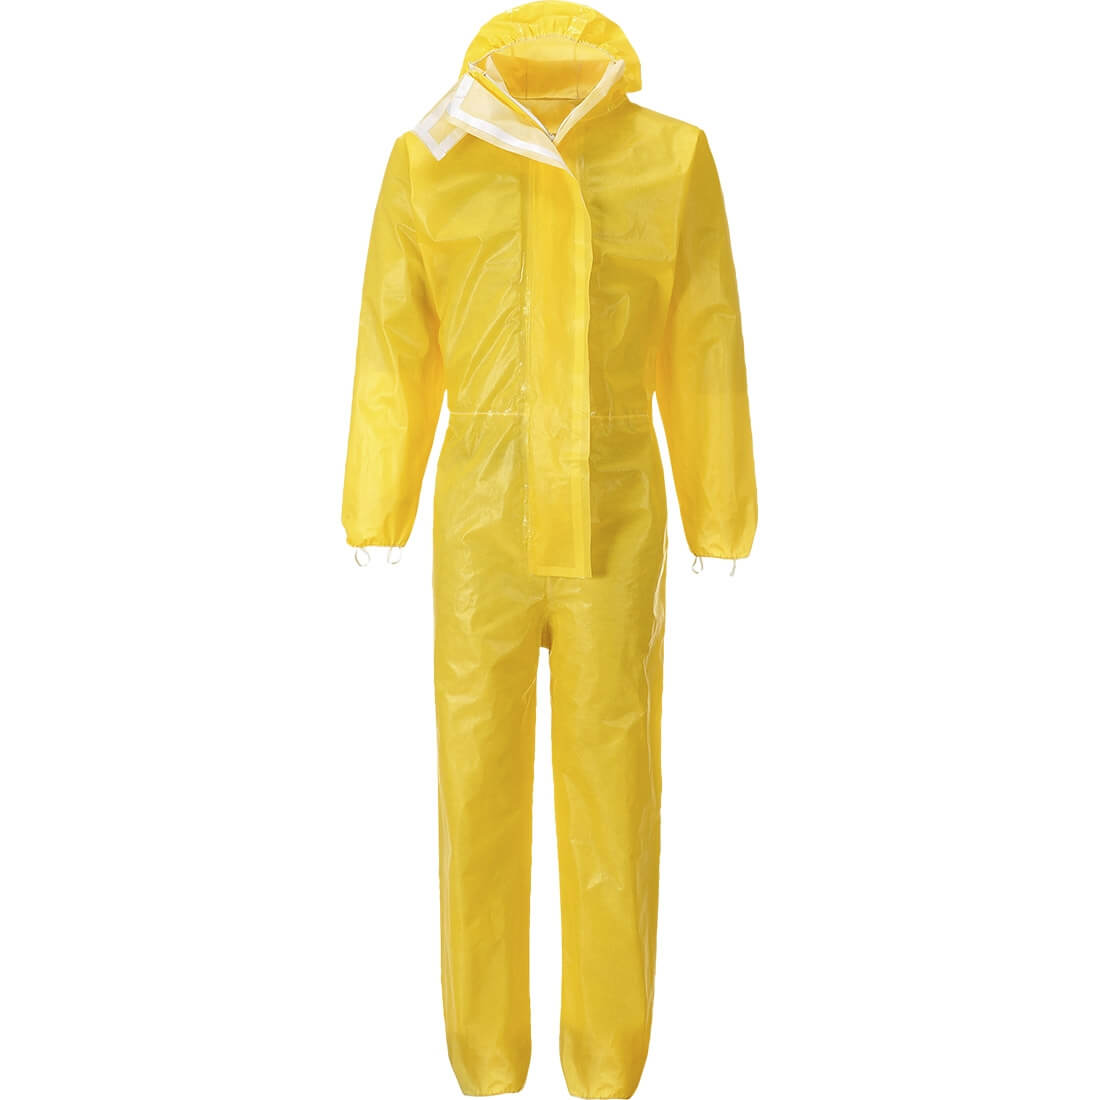 BizTex® MicroUltra 3/4/5/6 Coverall - Personal protection